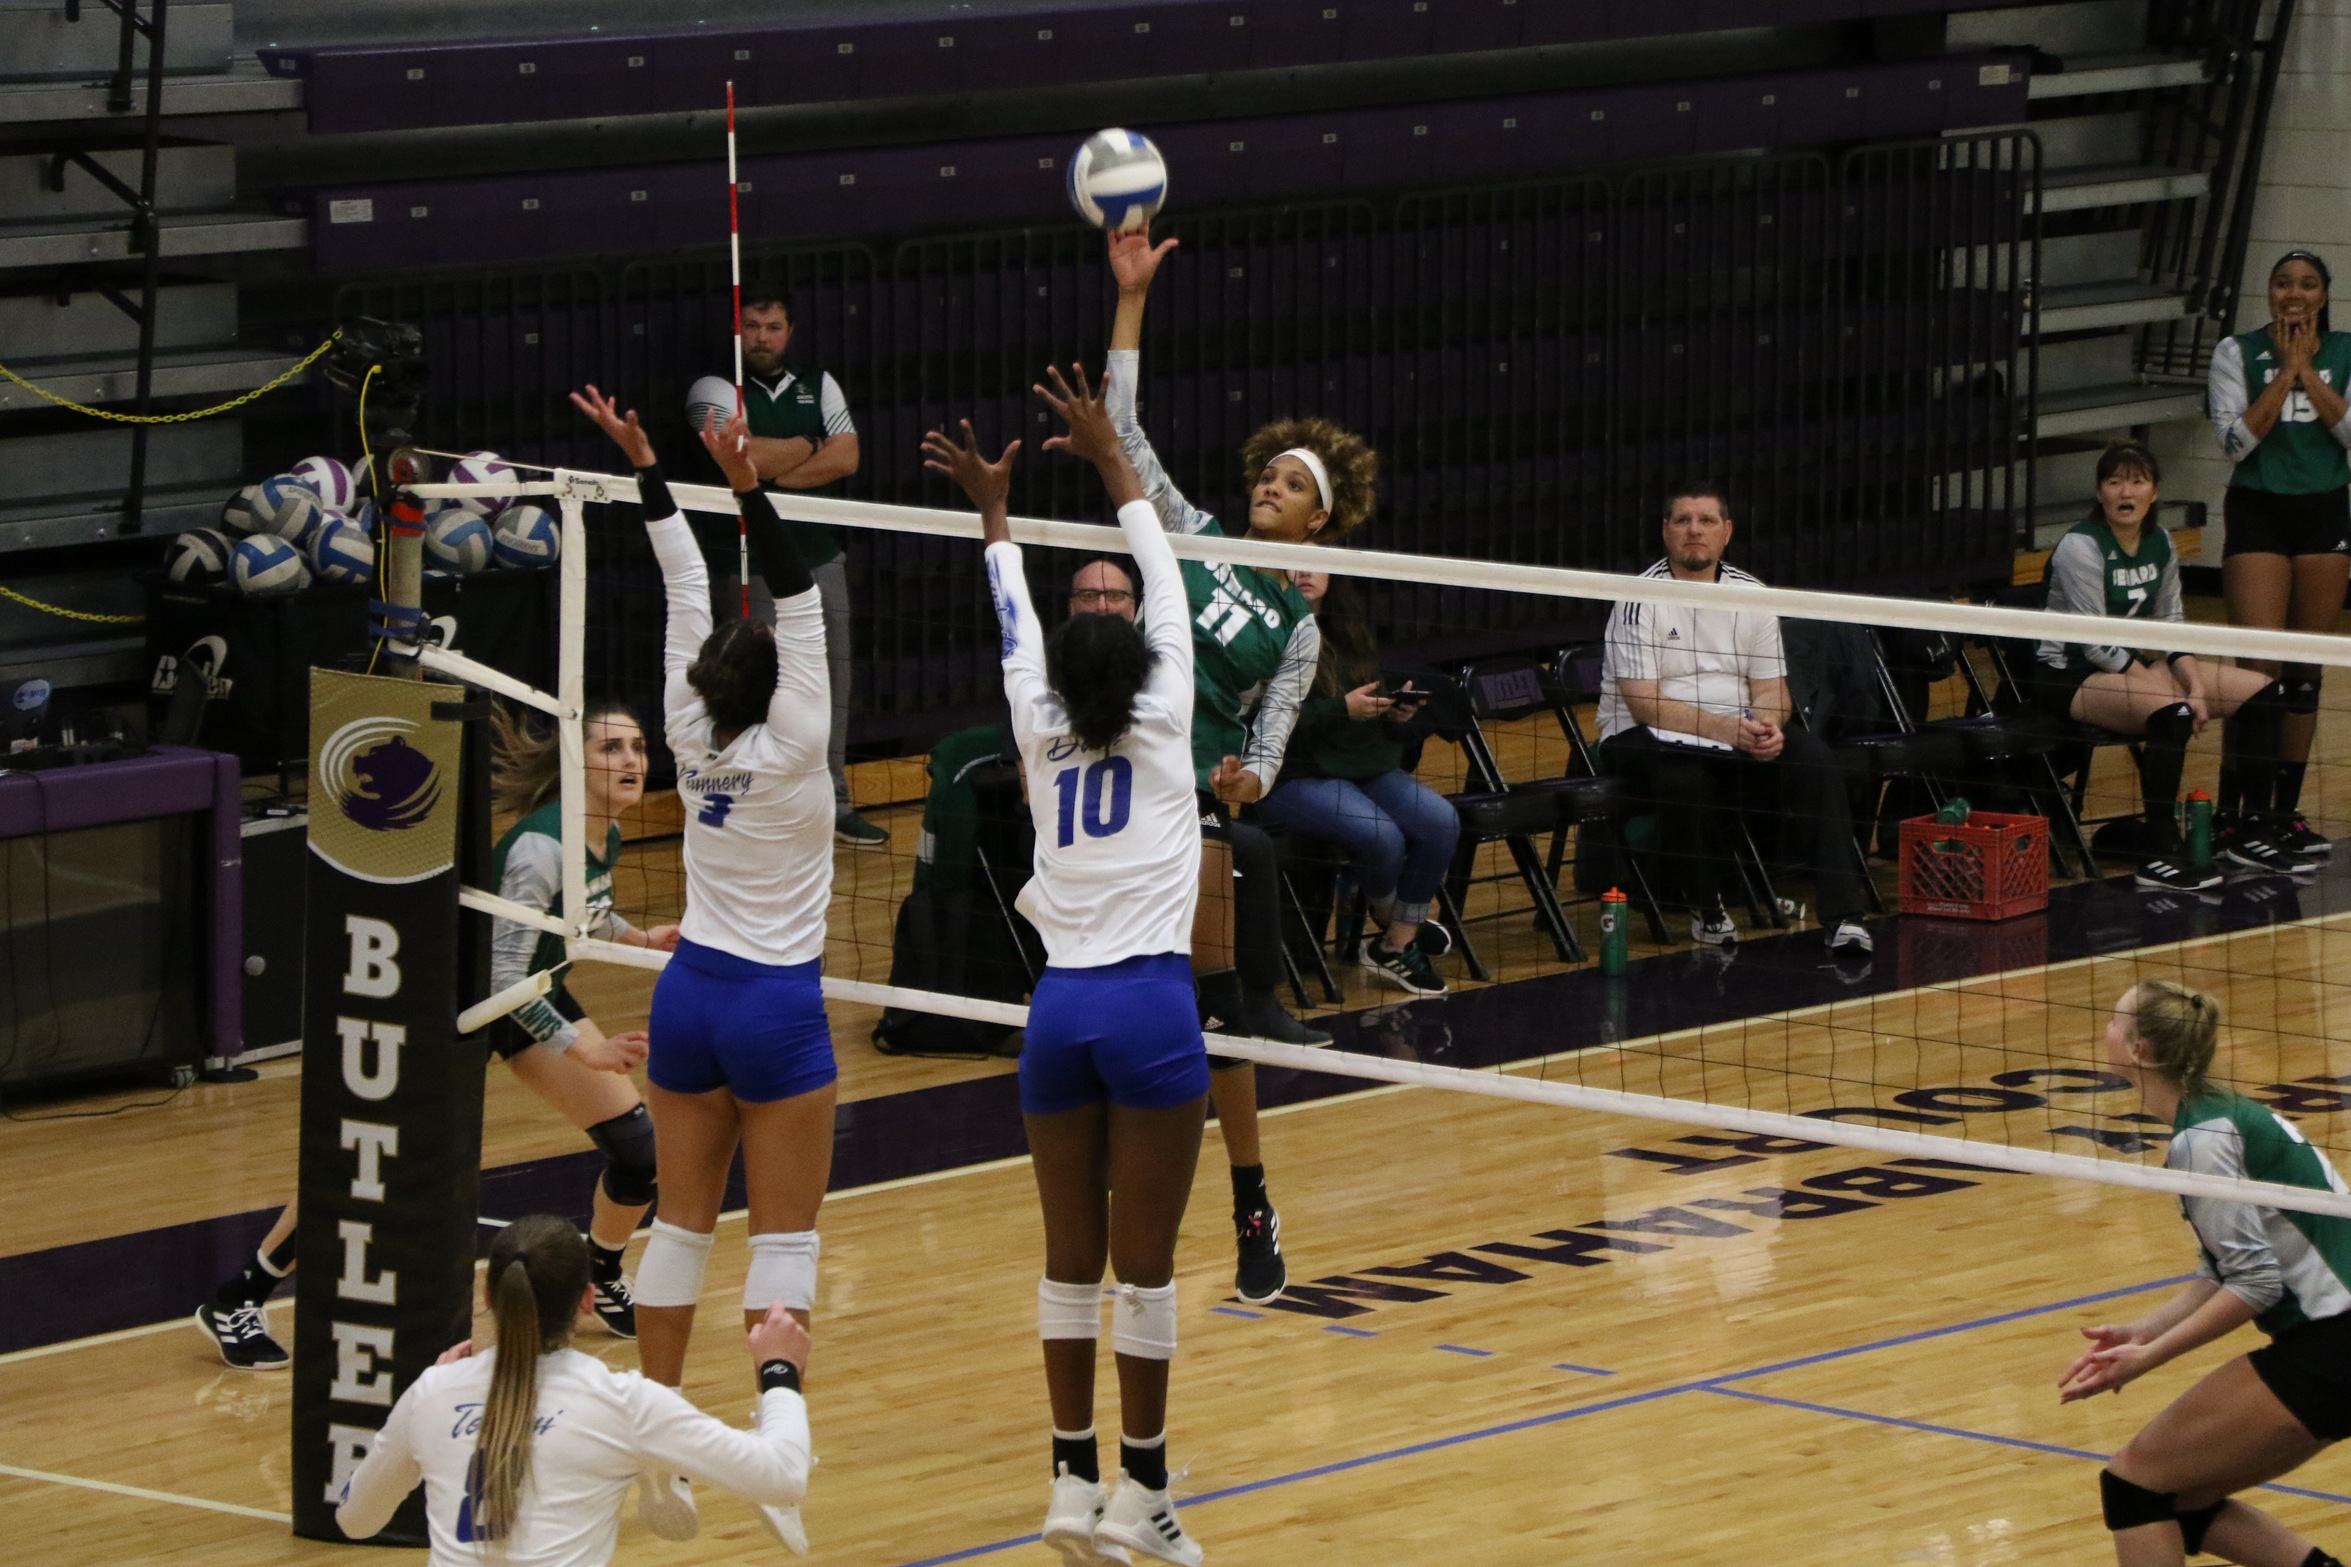 The Lady Saints defeat the Cougars in five sets to advance to the Region VI Championship